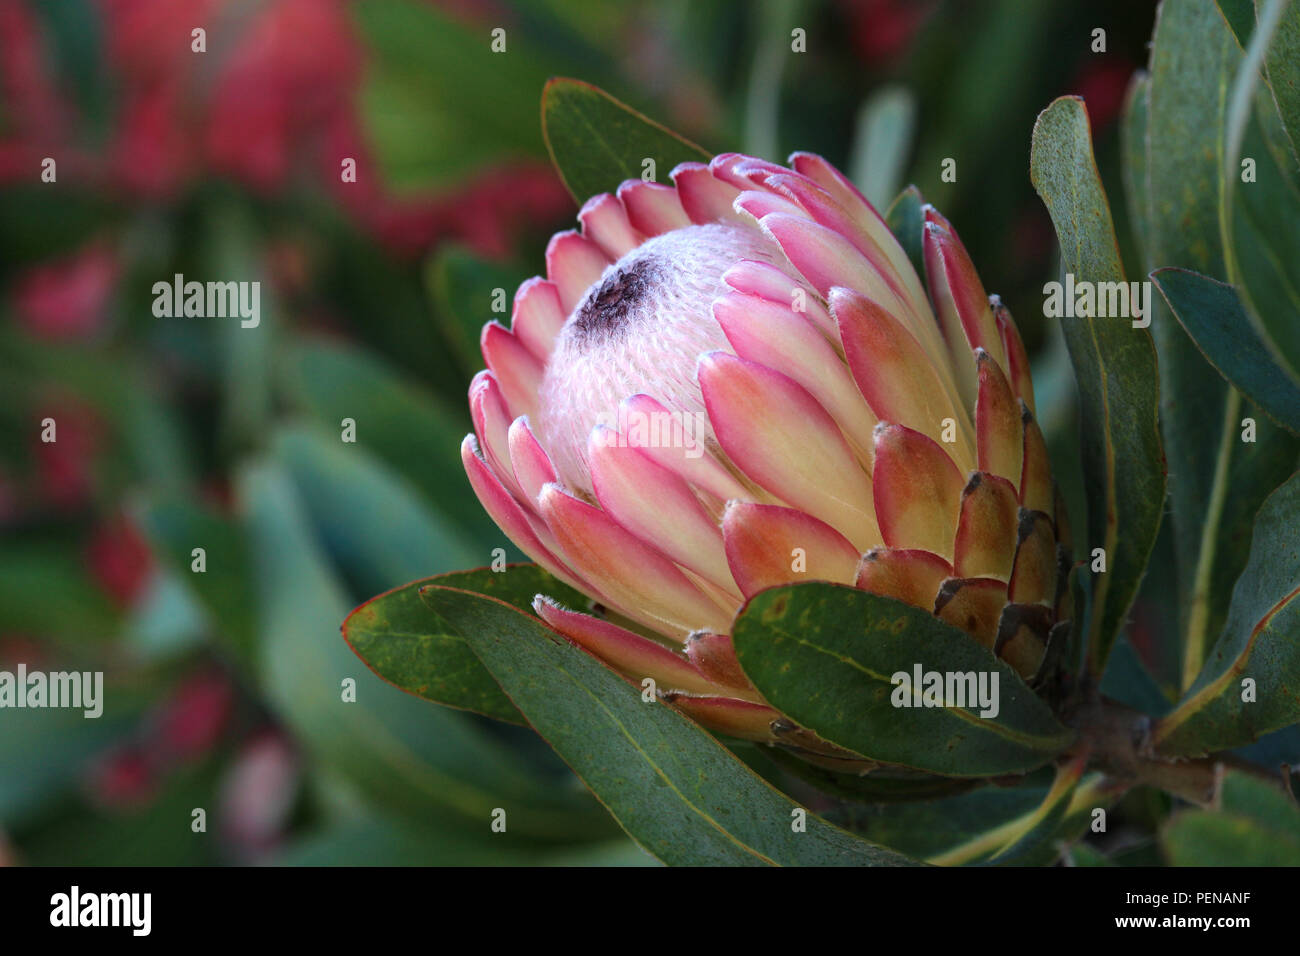 Closeup of pink protea flower blossom with nature background Stock Photo